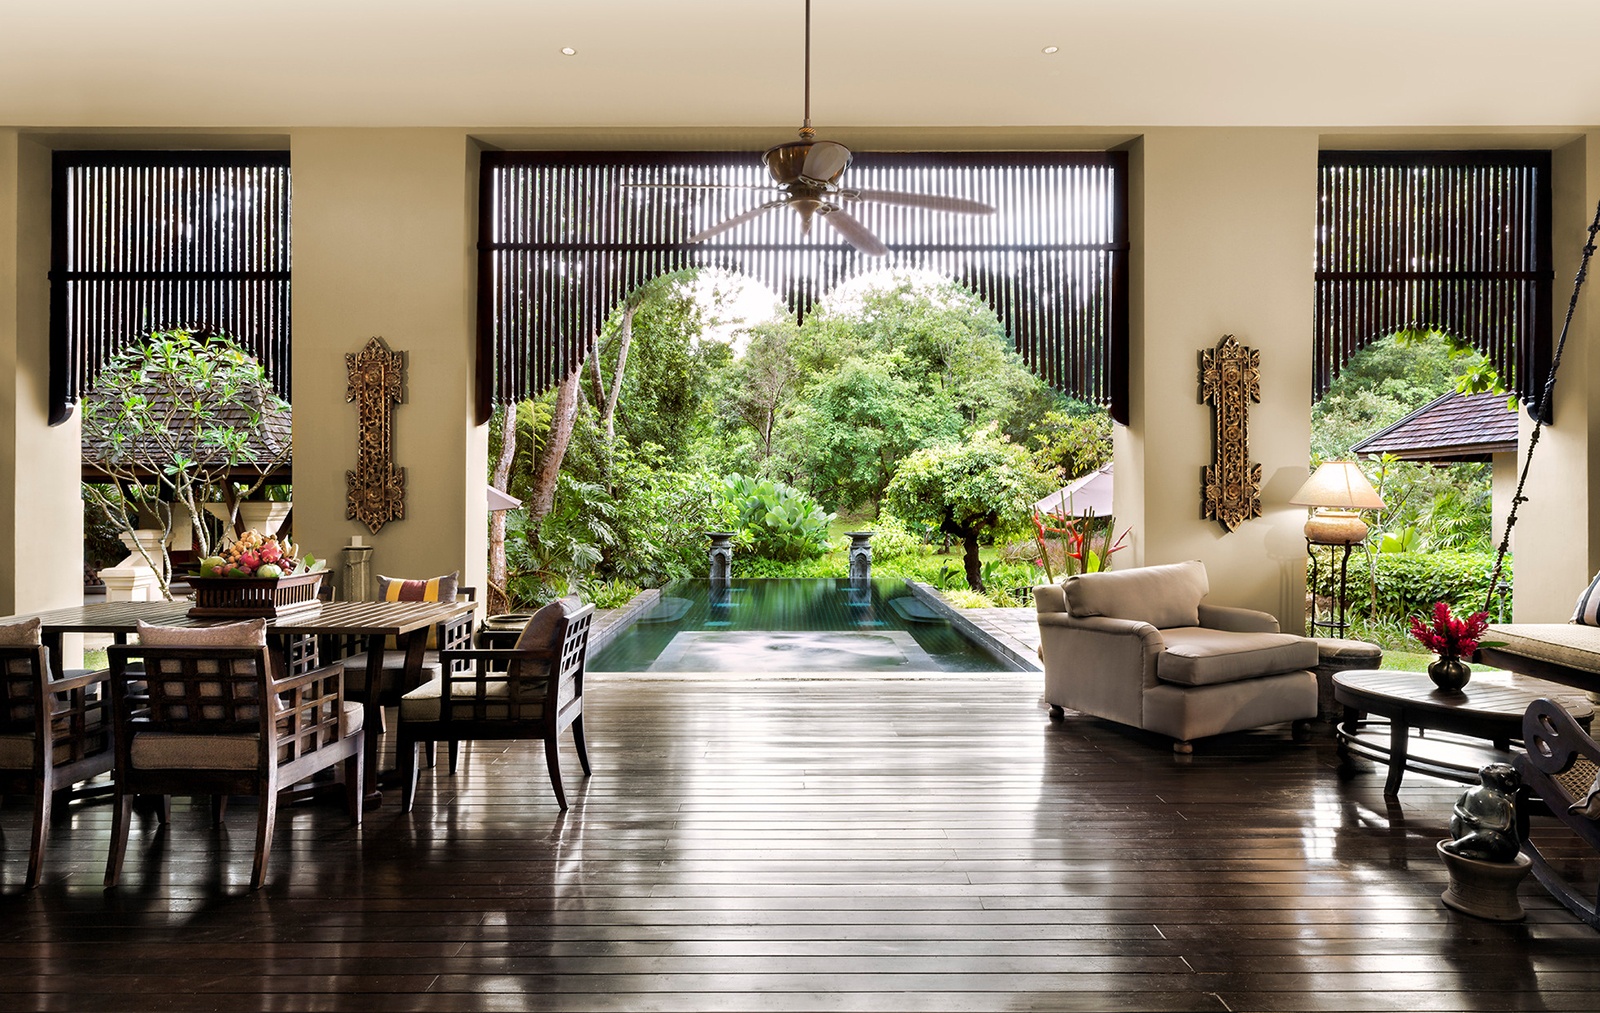 Look for our recommendations for some of the best Chiang Mai hotels in Thailand